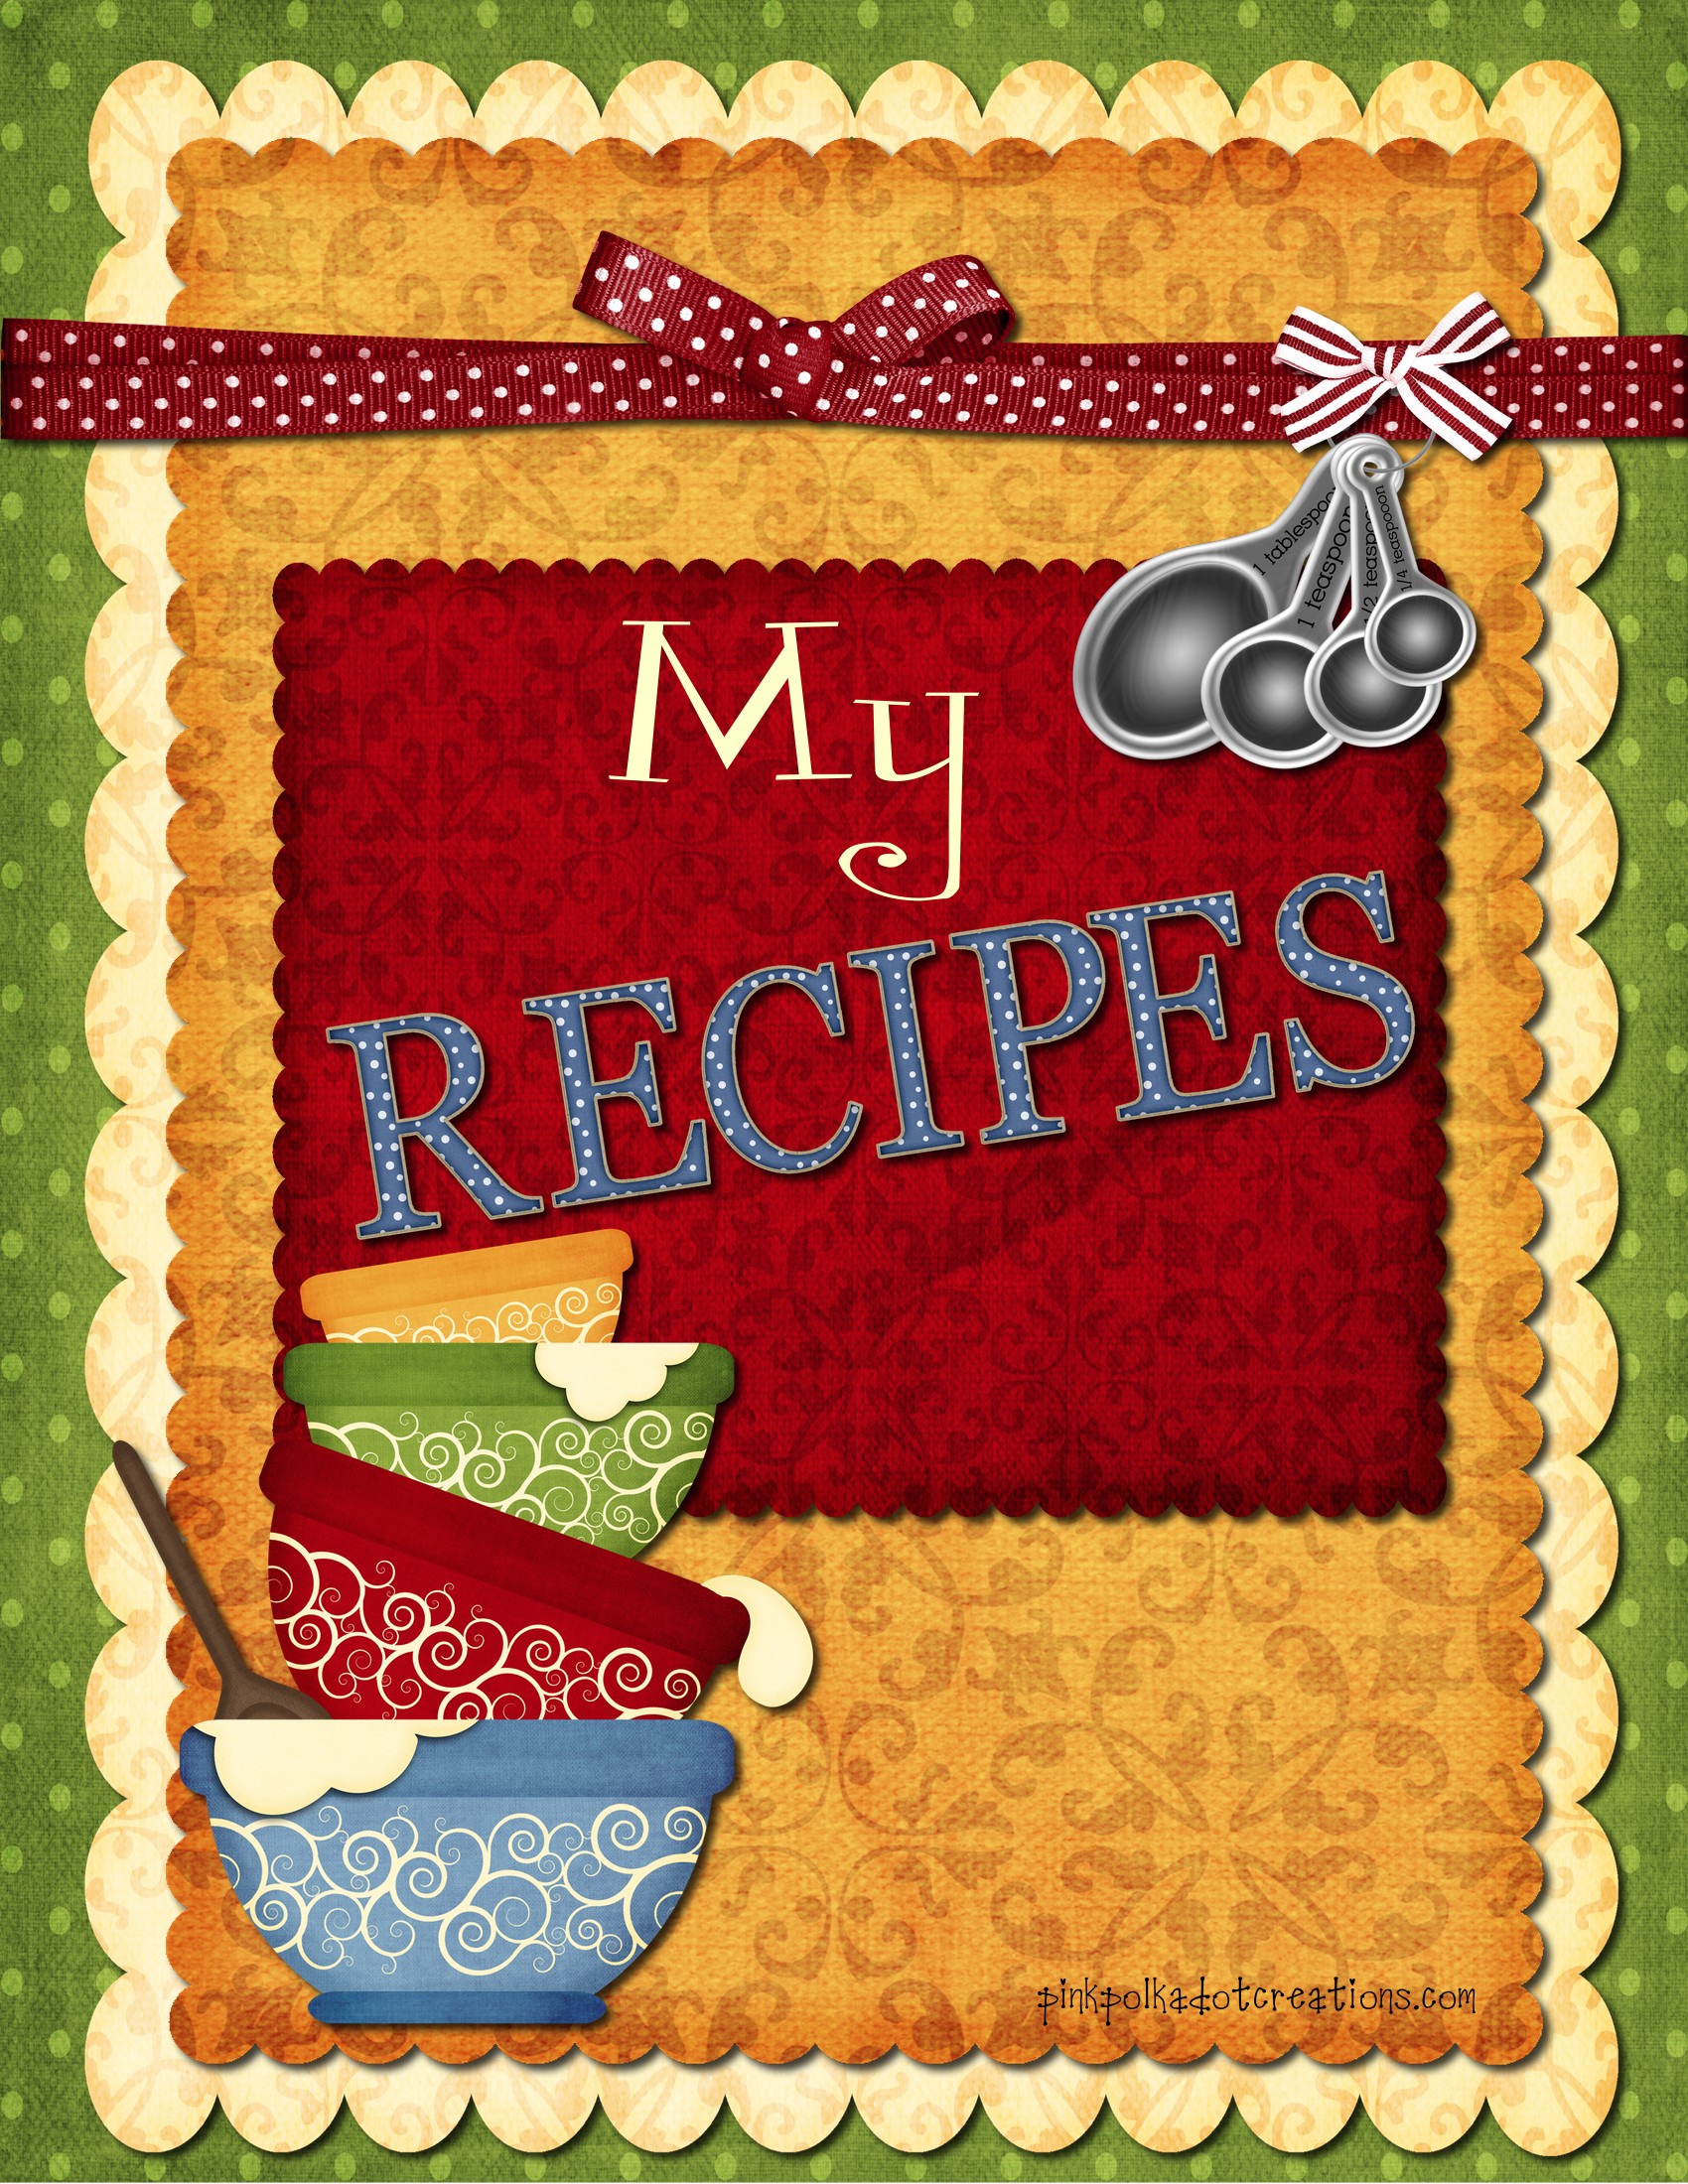 printable-front-cover-recipe-book-cover-get-your-hands-on-amazing